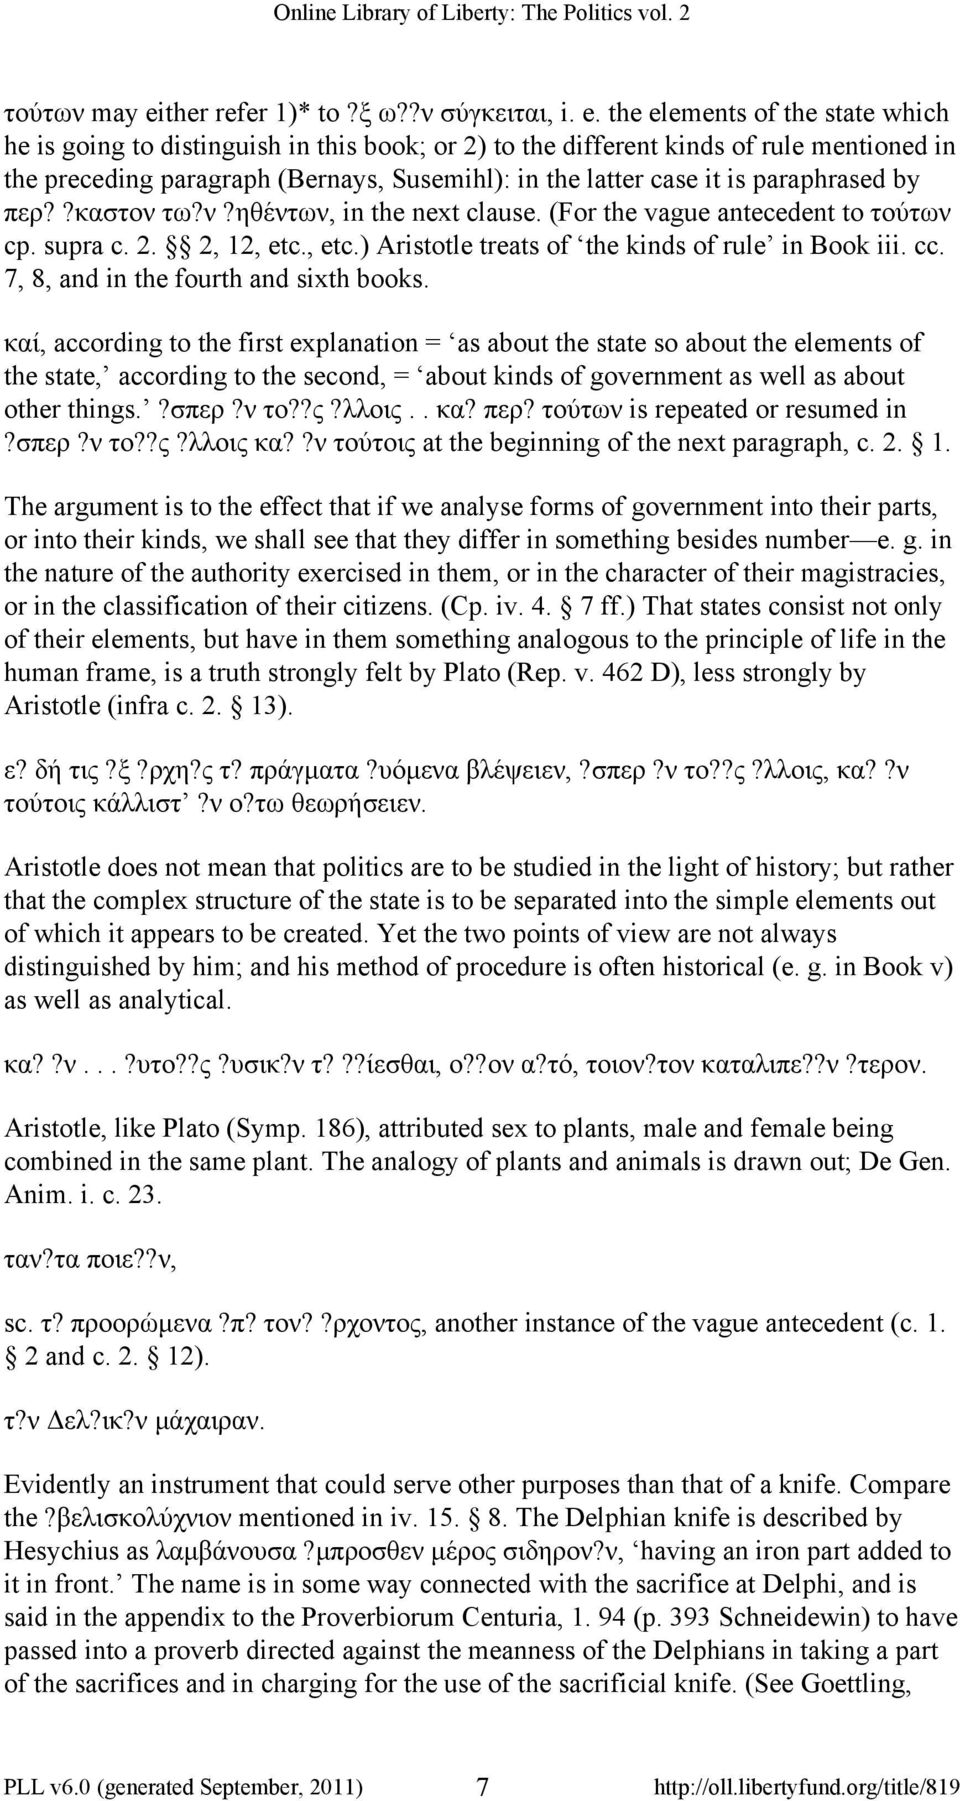 the elements of the state which he is going to distinguish in this book; or 2) to the different kinds of rule mentioned in the preceding paragraph (Bernays, Susemihl): in the latter case it is